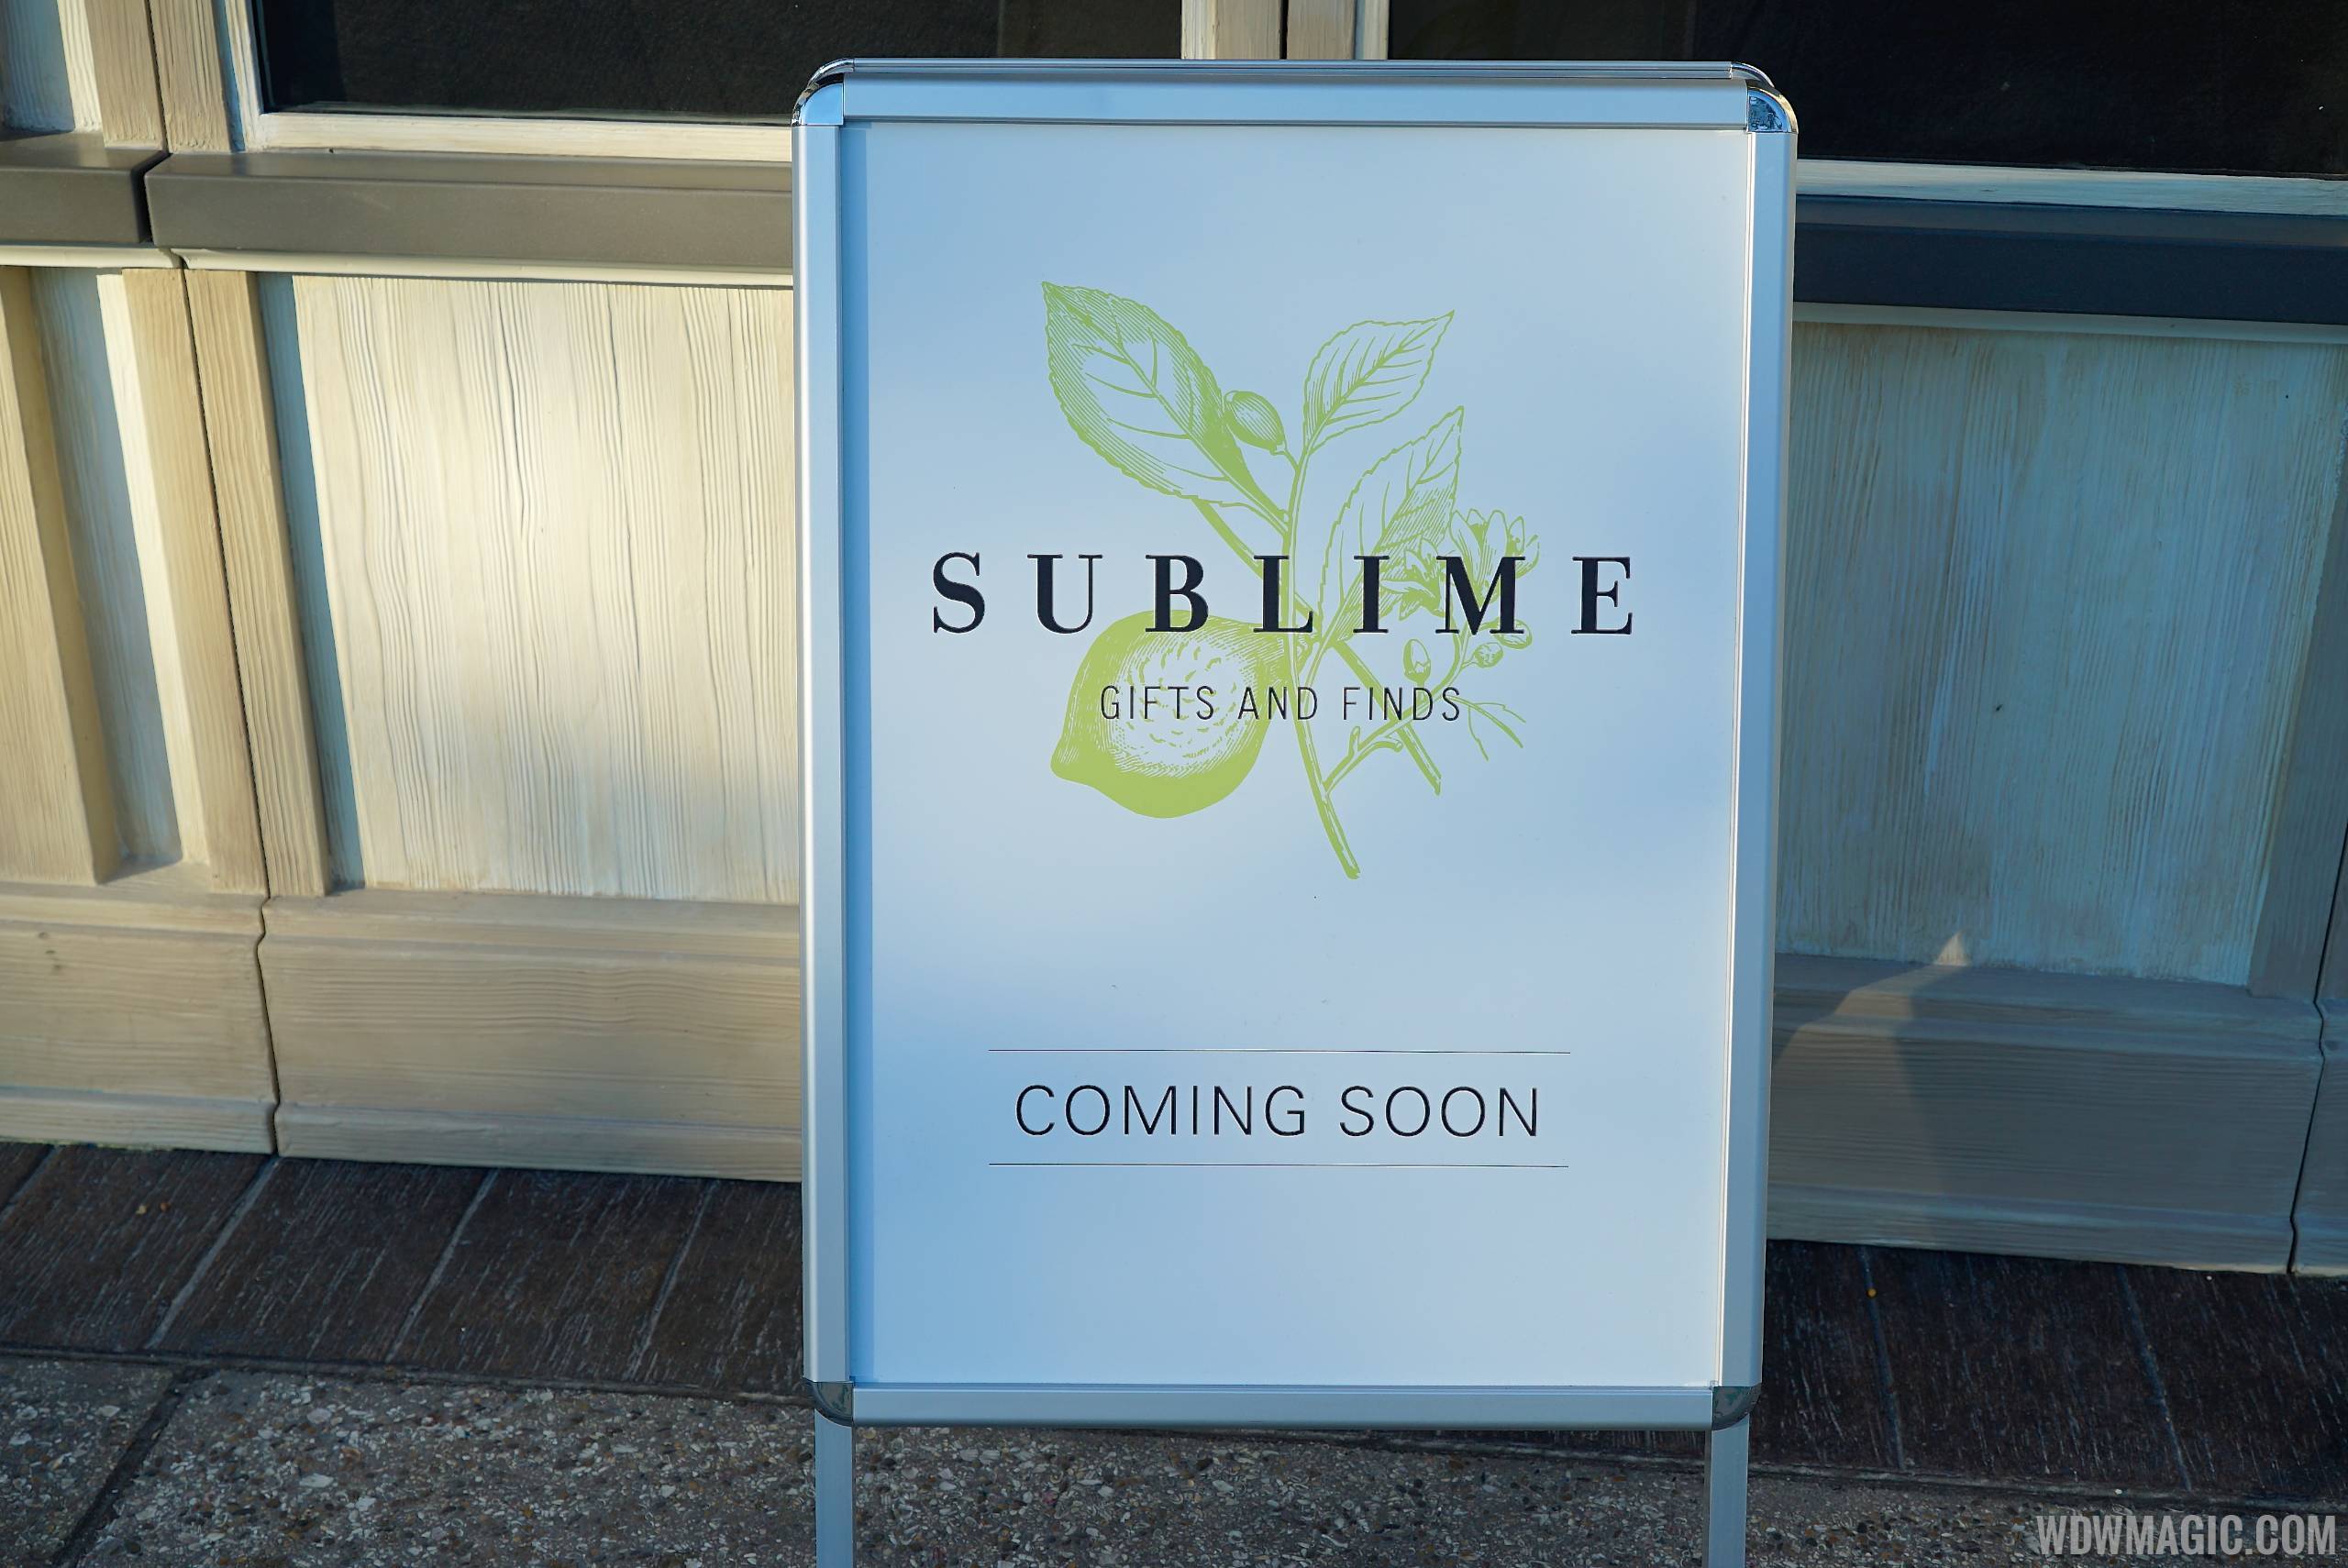 Two new kiosks coming to Downtown Disney - Set The Bar and Sublime